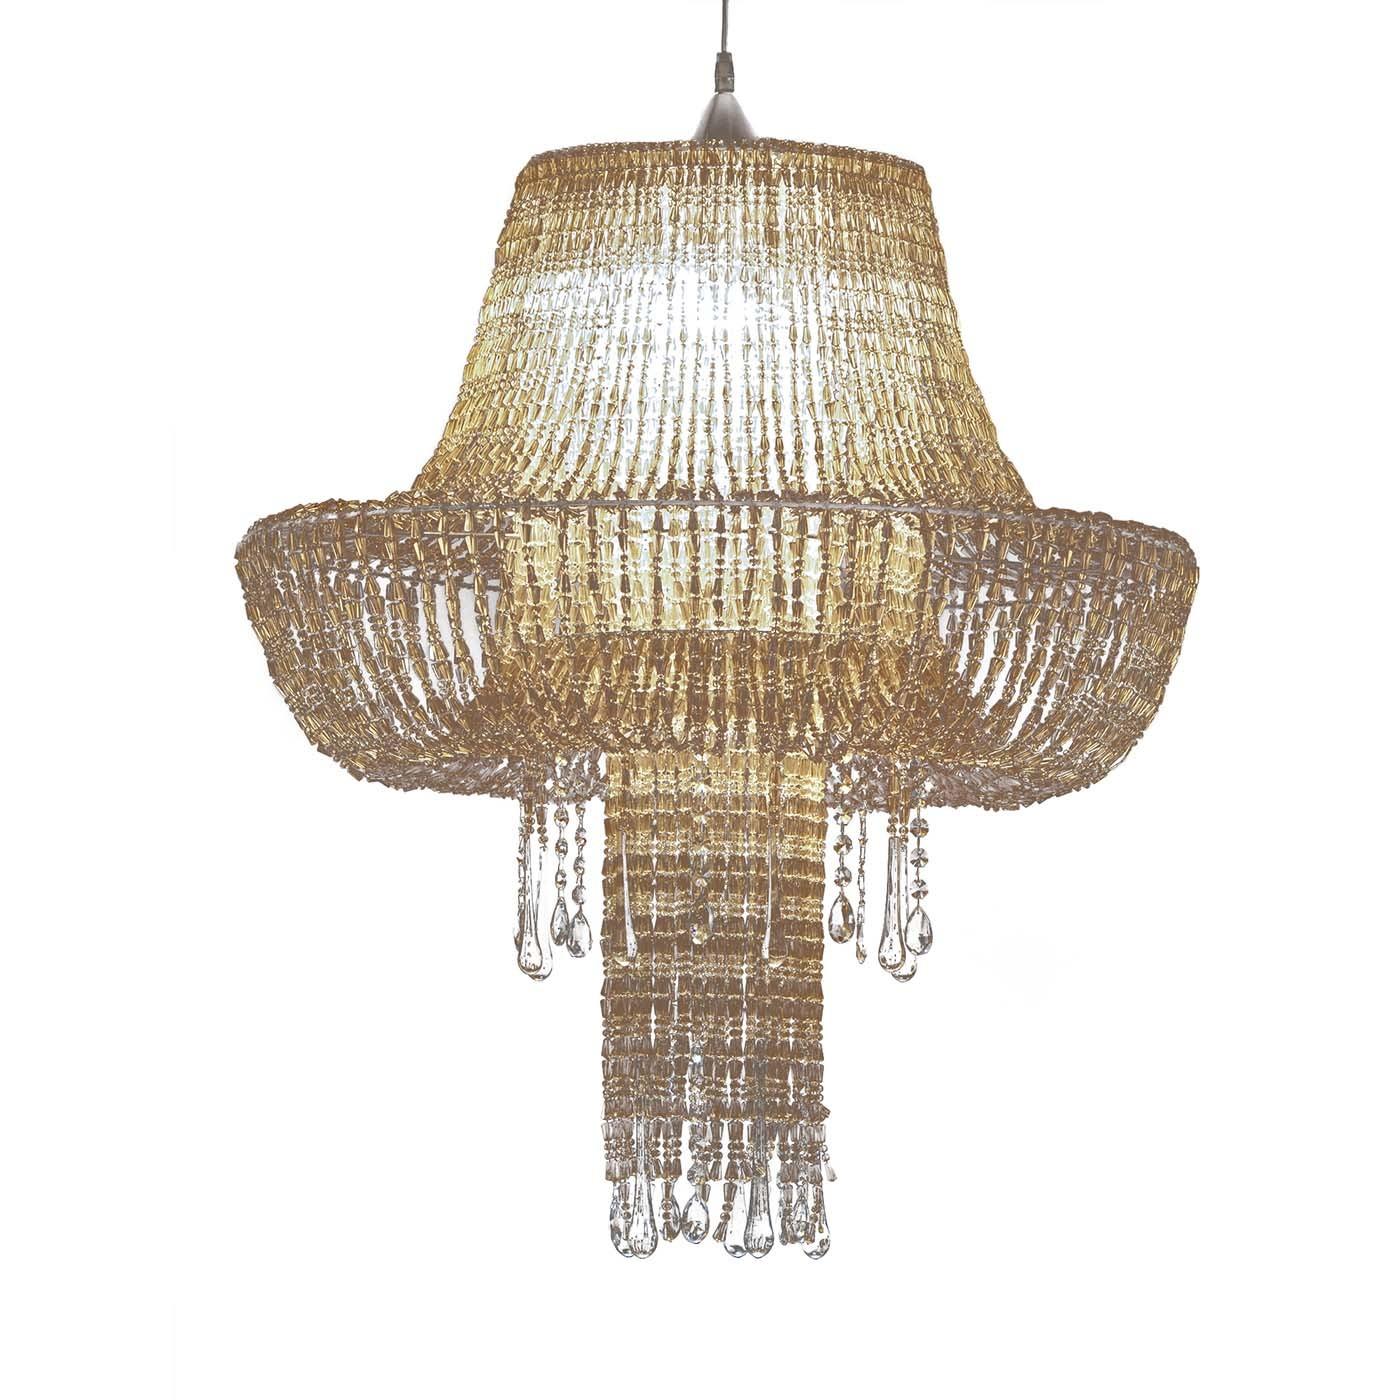 Supported by a chrome-finished metal structure, this exquisite pendant lamp showcases a grand silhouette entirely handcrafted of acrylic golden bead strands with the prized addition of pending crystal elements. The E27 bulb hosted in the diffuser